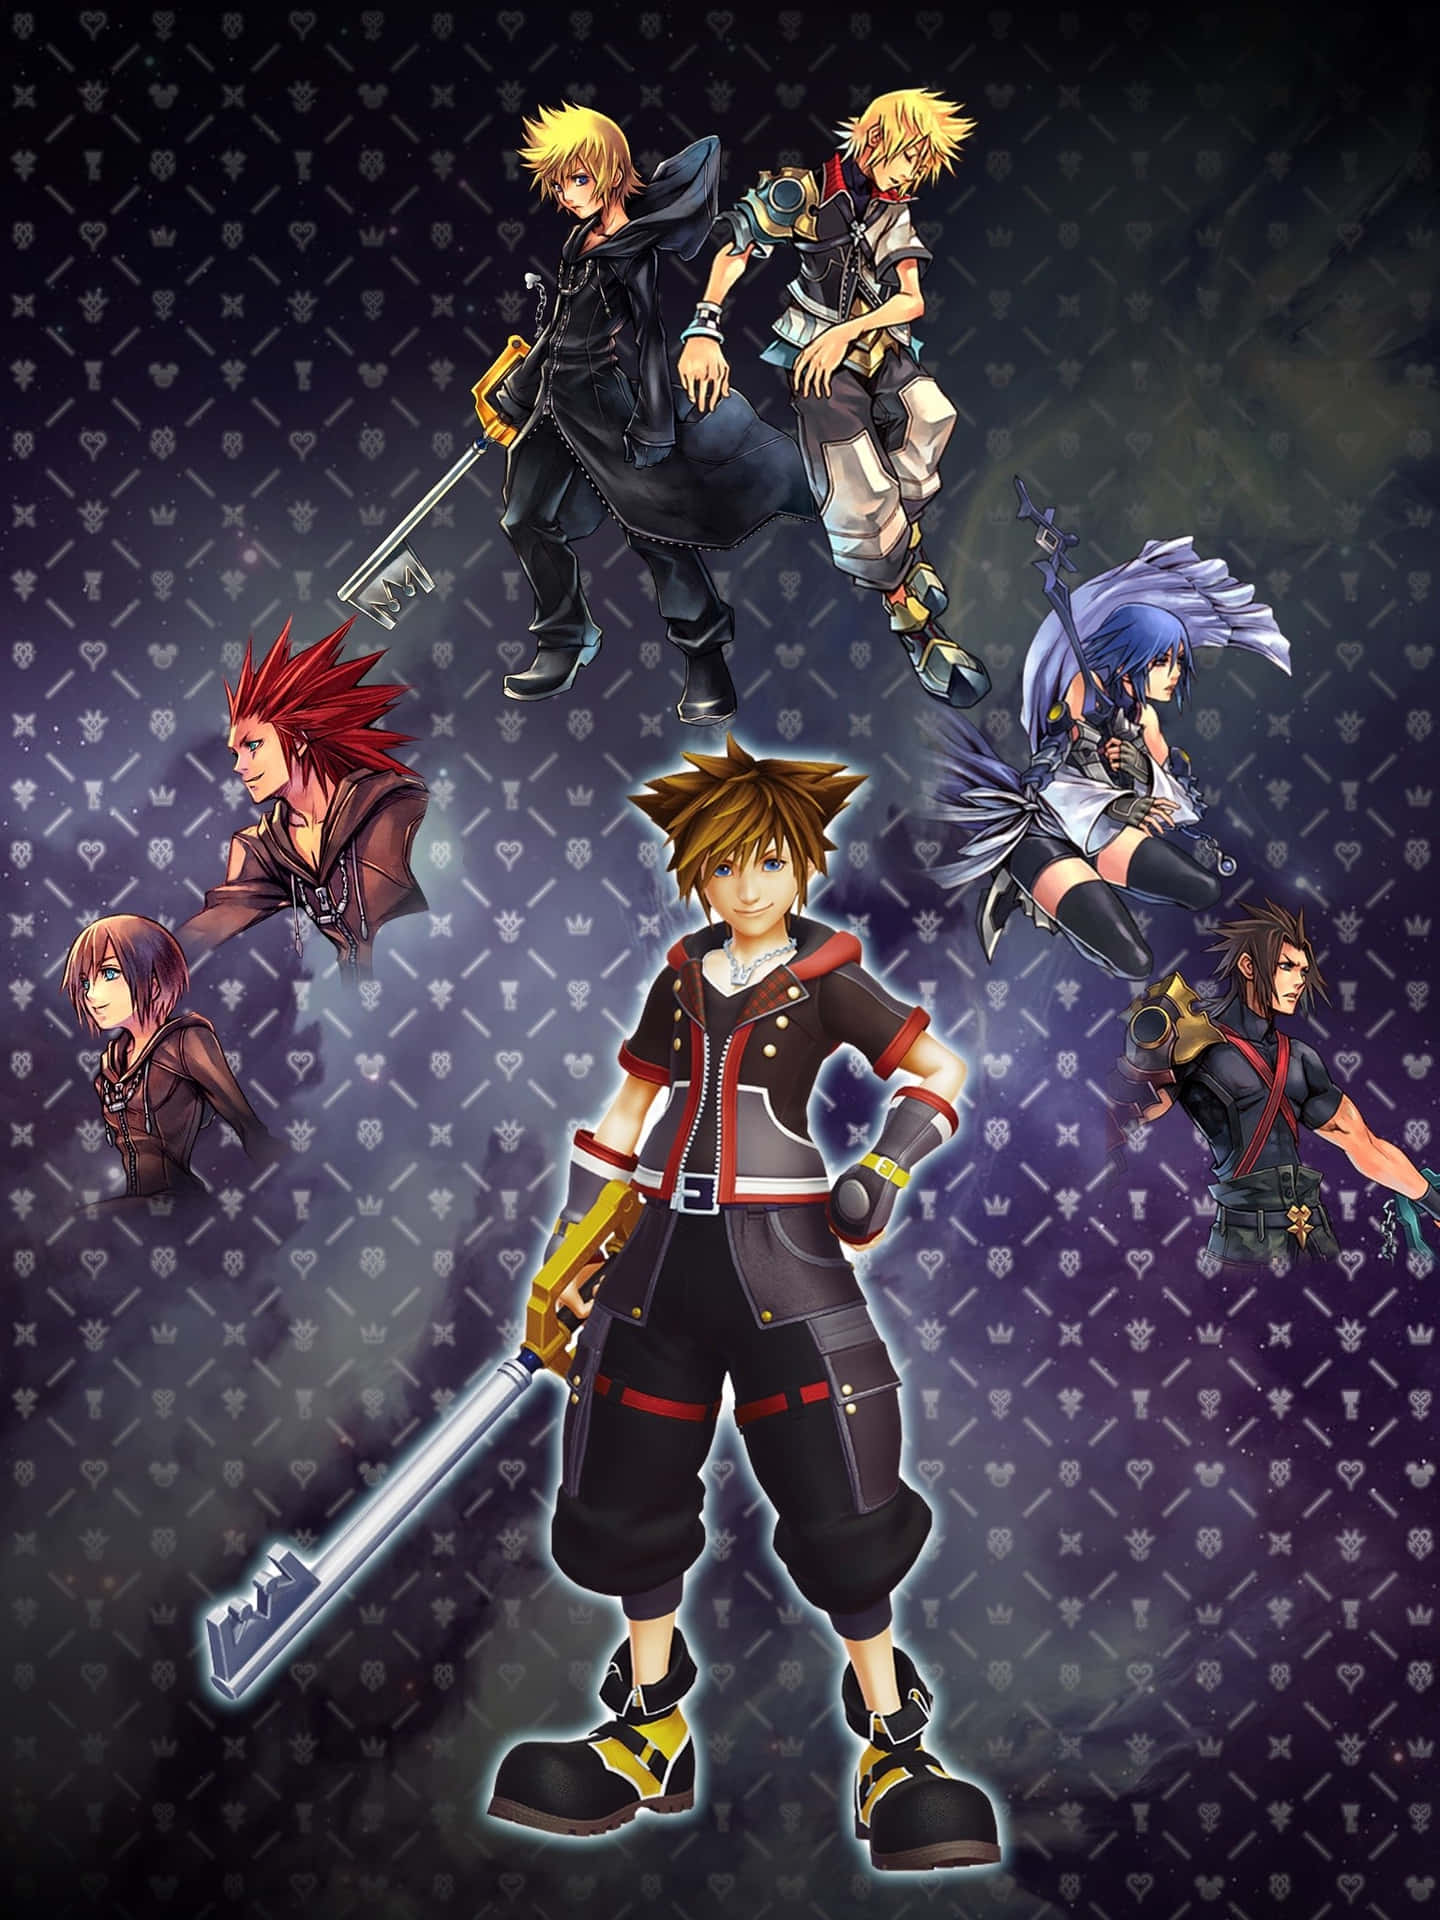 Travel through the Heart of All Worlds in the Epic Kingdom Hearts Adventure